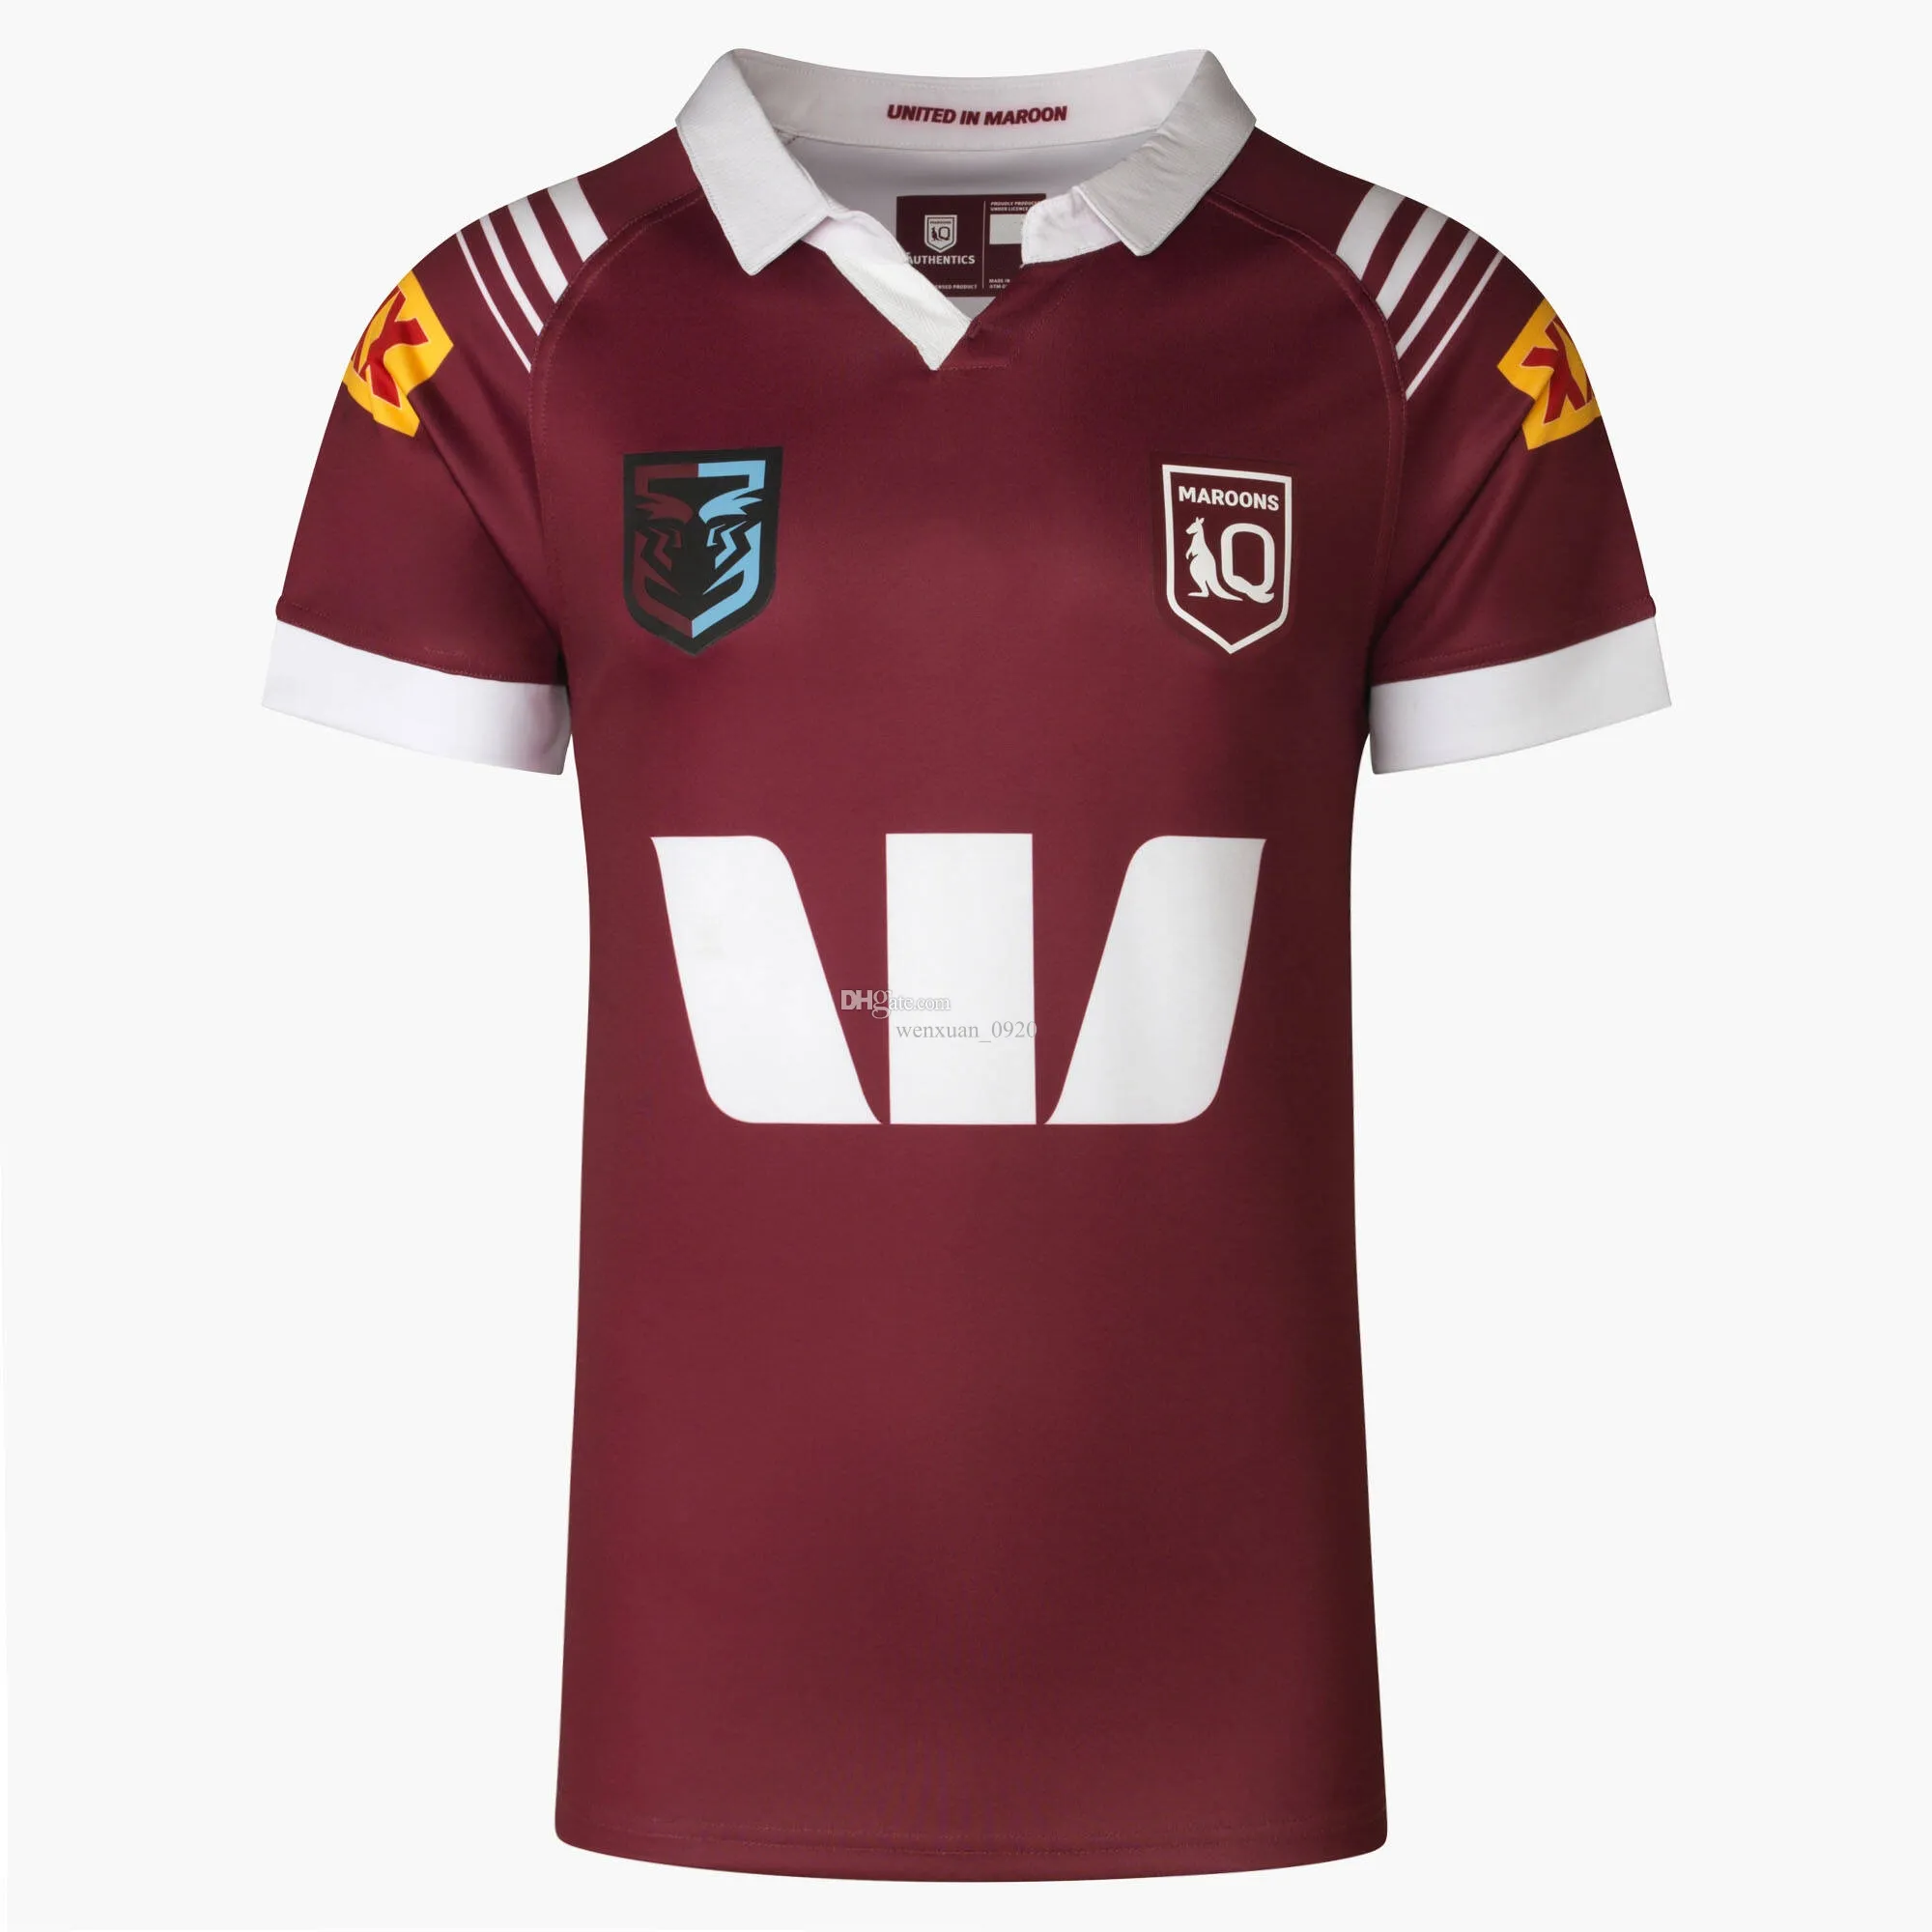 2024 South Sydney Rabbitohs Rugby Jerseys 23 24 Qld Maroons NSW Blues Knights Raider Parramatta Eels Sydney Roosters